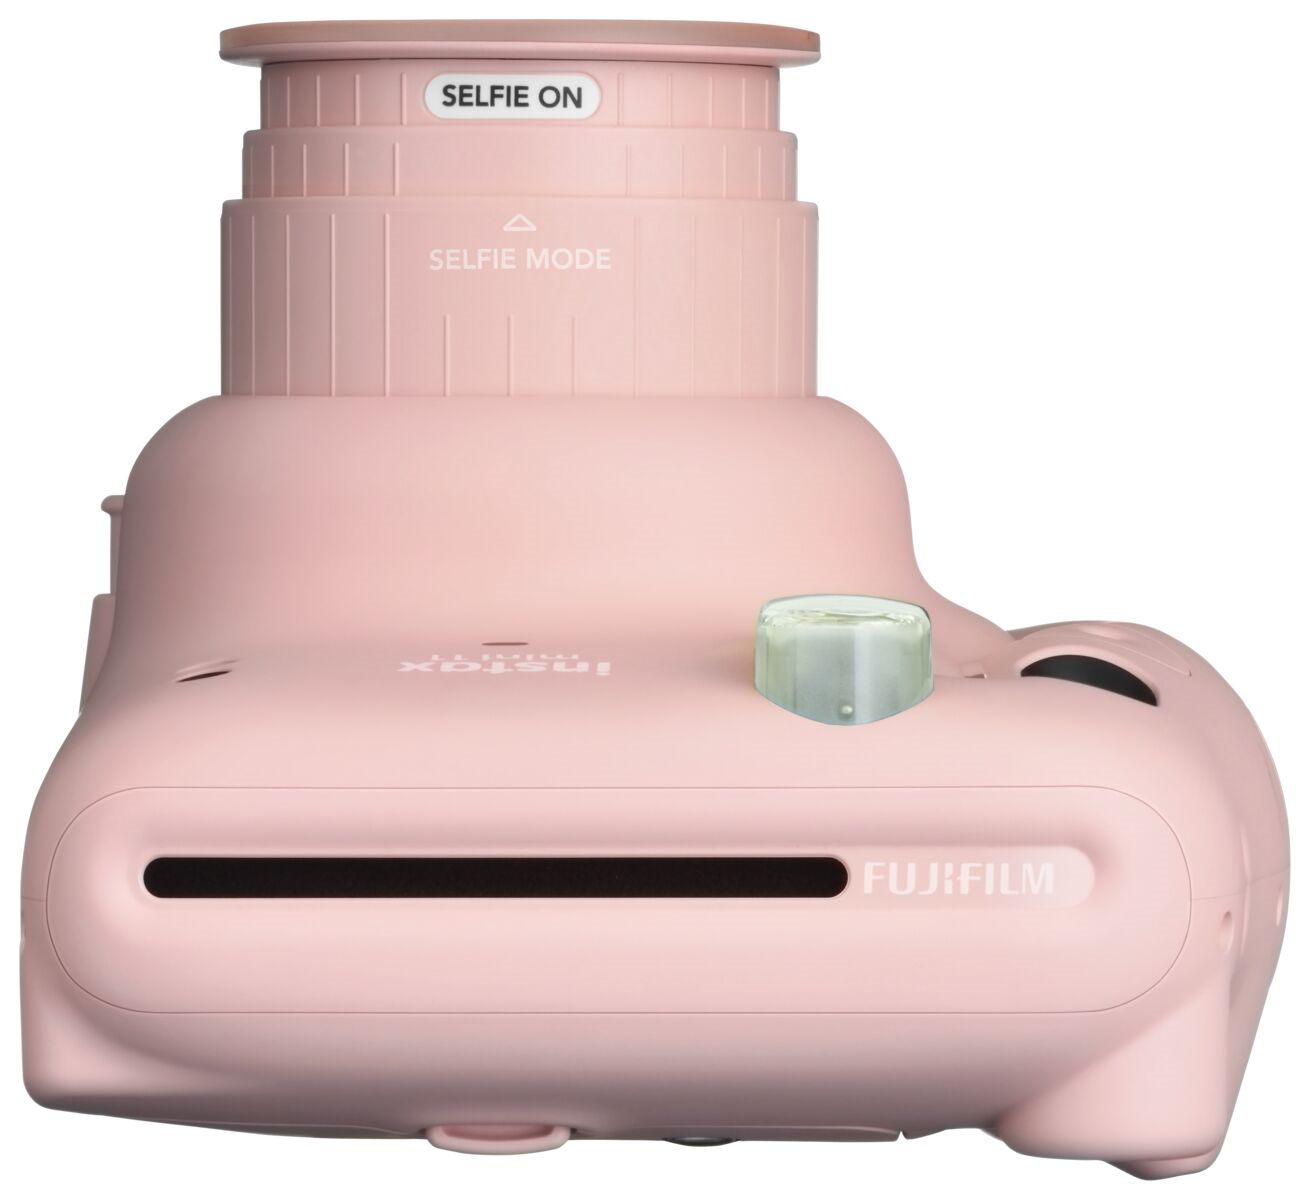 Picture of Instax Mini 11 Blush Pink